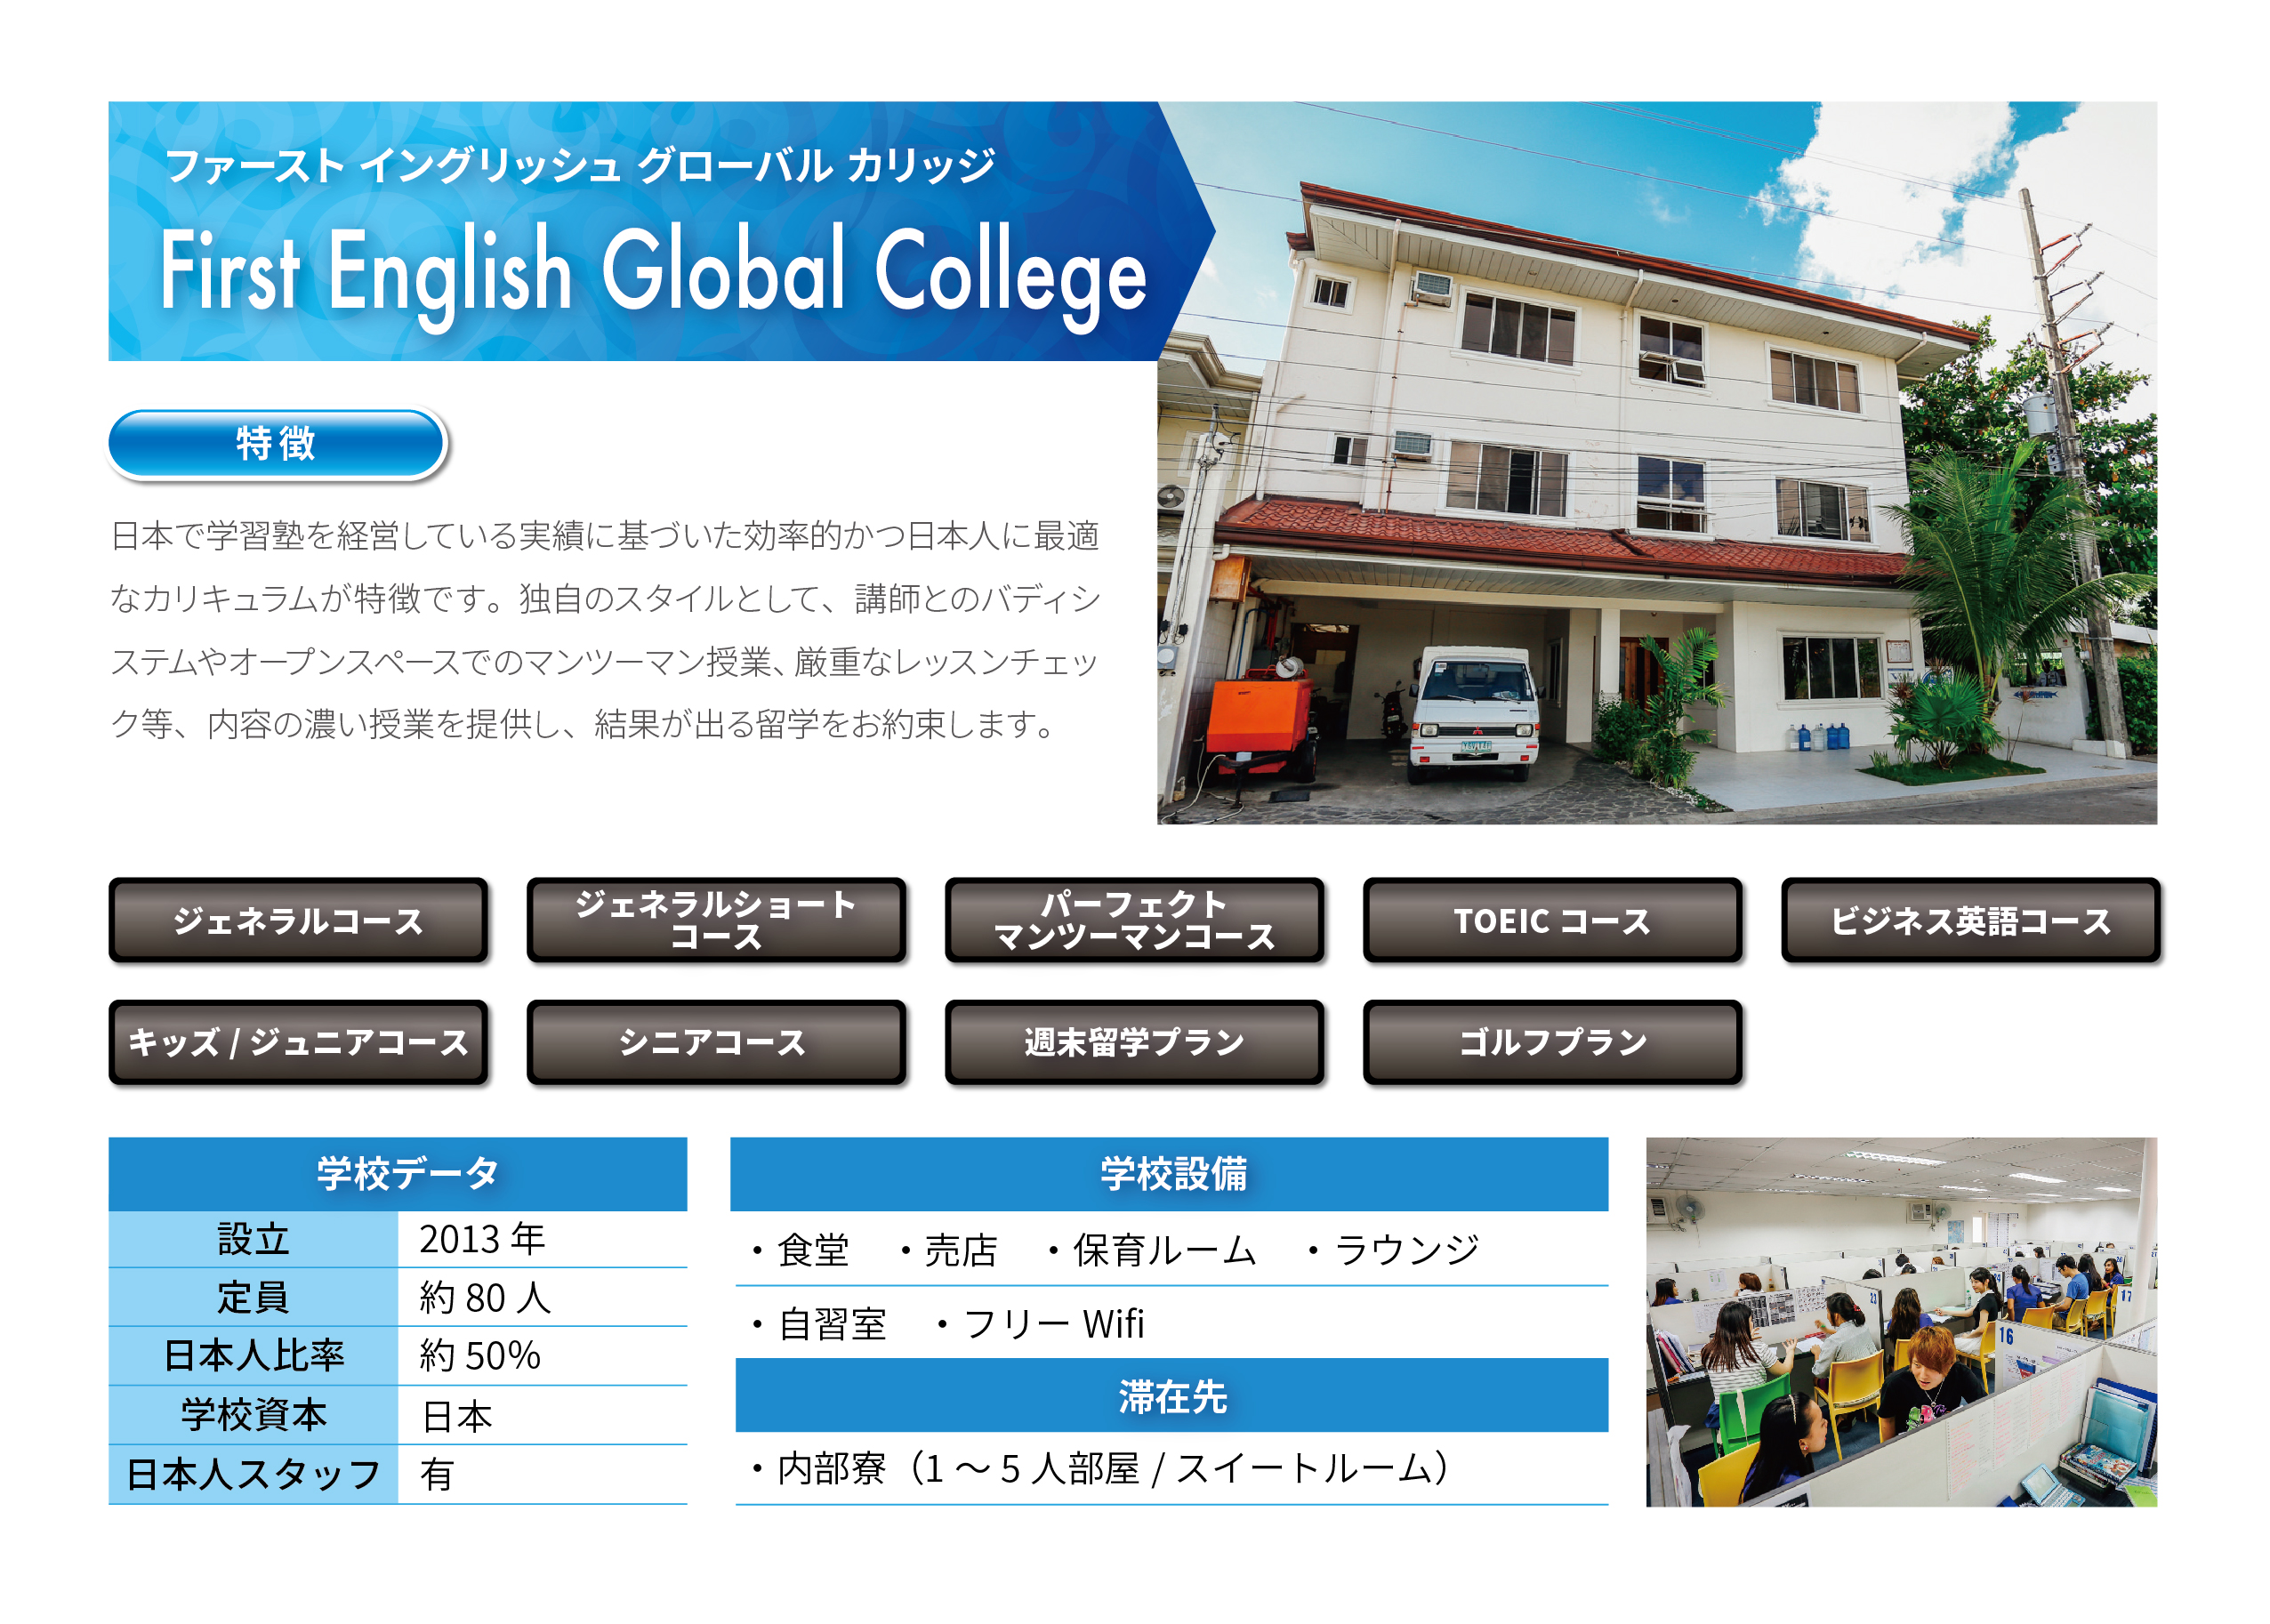 First English Global College 学校案内